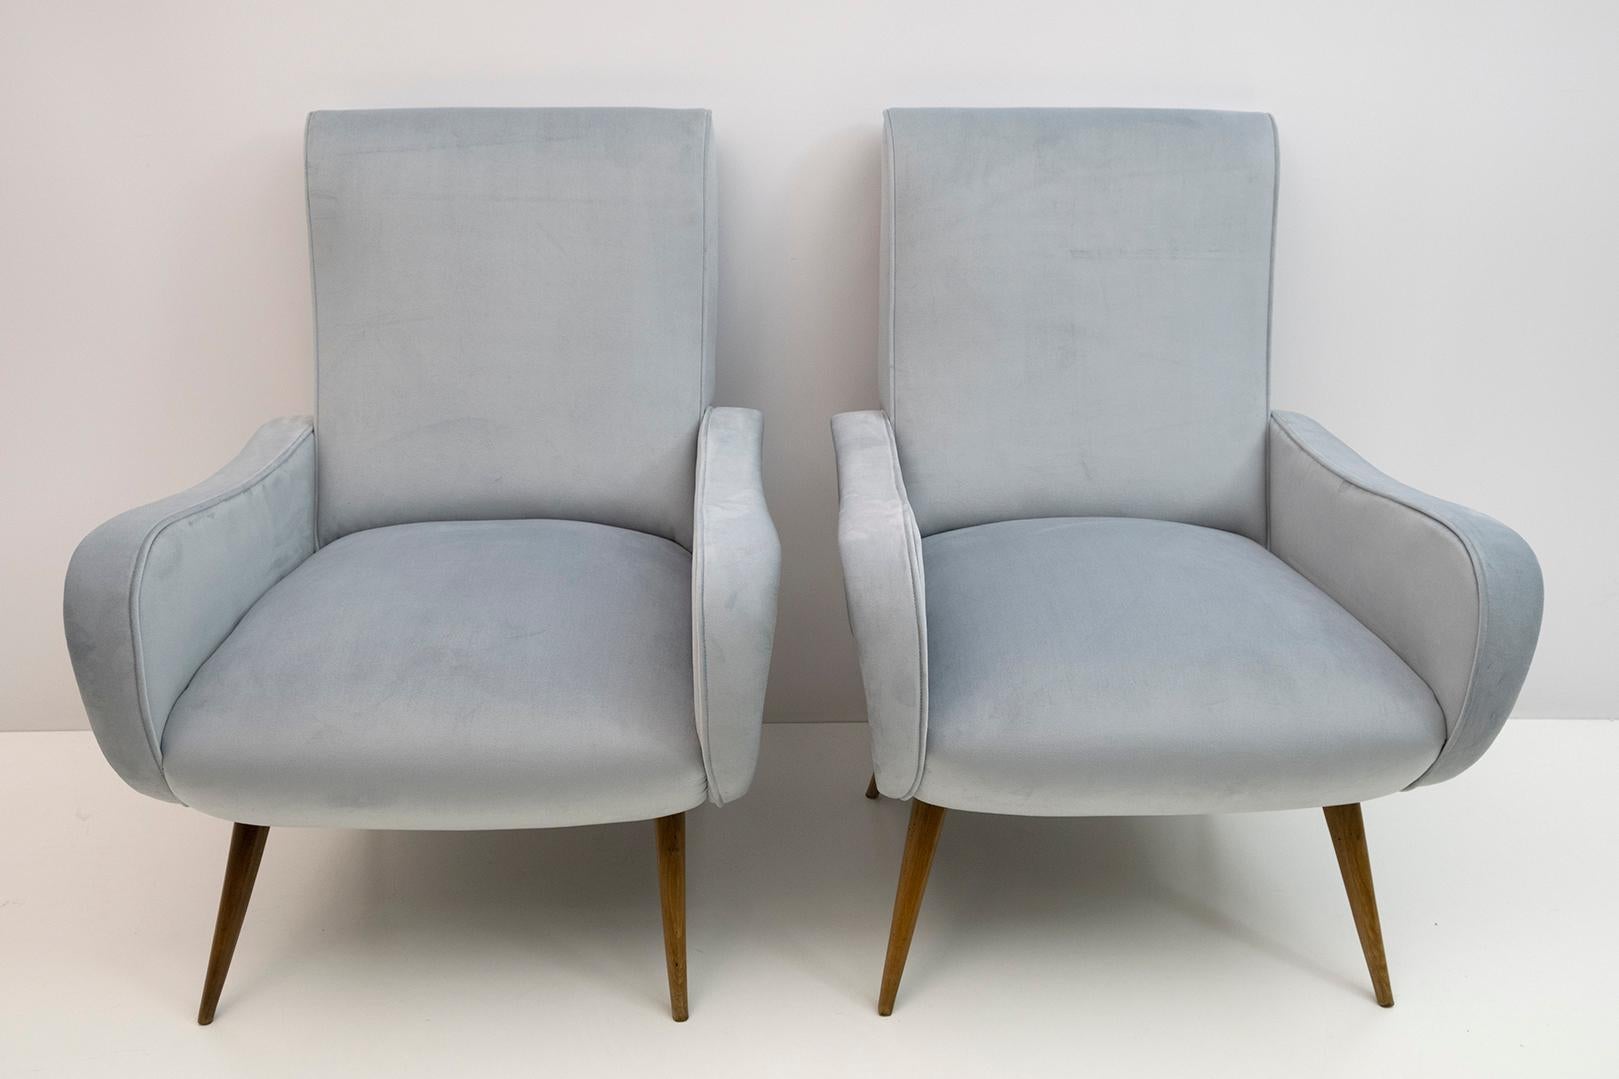 Pair of Marco Zanuso style armchairs. The armchairs have been restored and reupholstered in blue velvet, the feet are in beech wood.